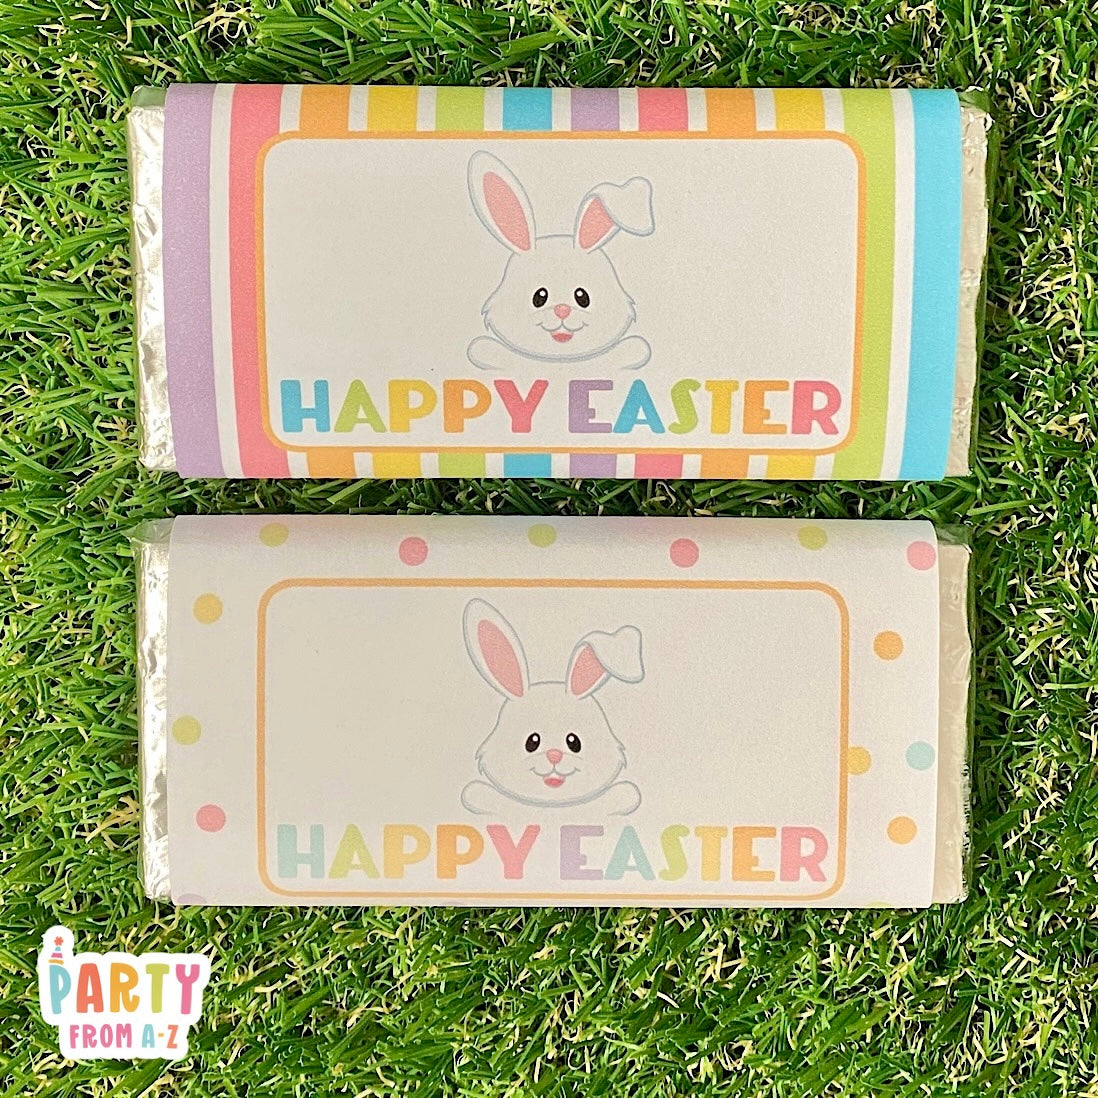 Limited Stock Easter Gift Box